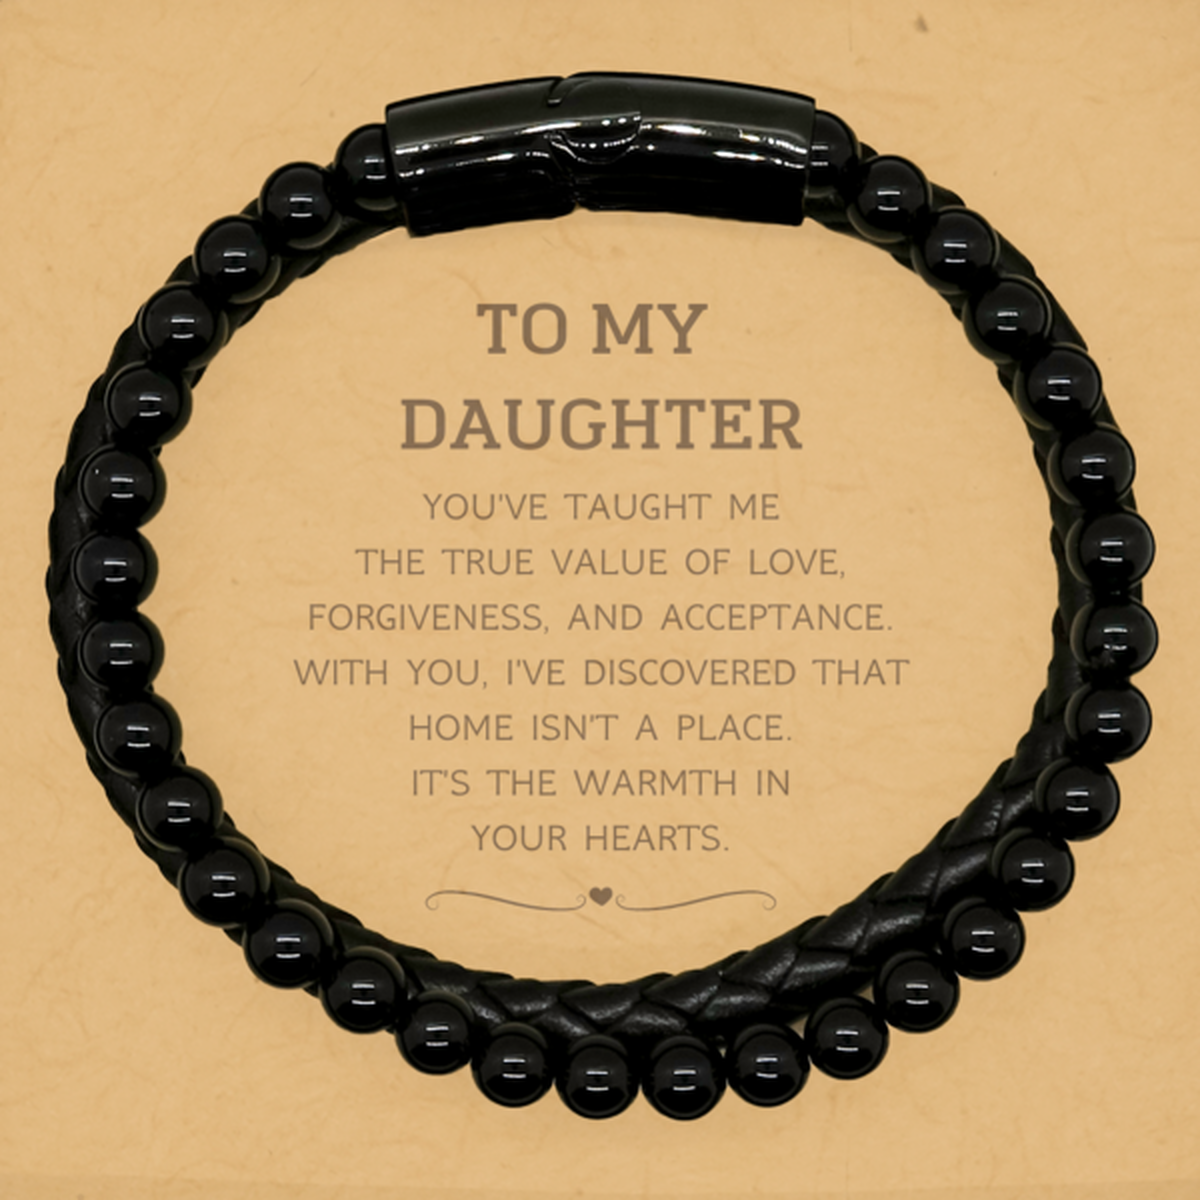 To My Daughter Gifts, You've taught me the true value of love, Thank You Gifts For Daughter, Birthday Stone Leather Bracelets For Daughter